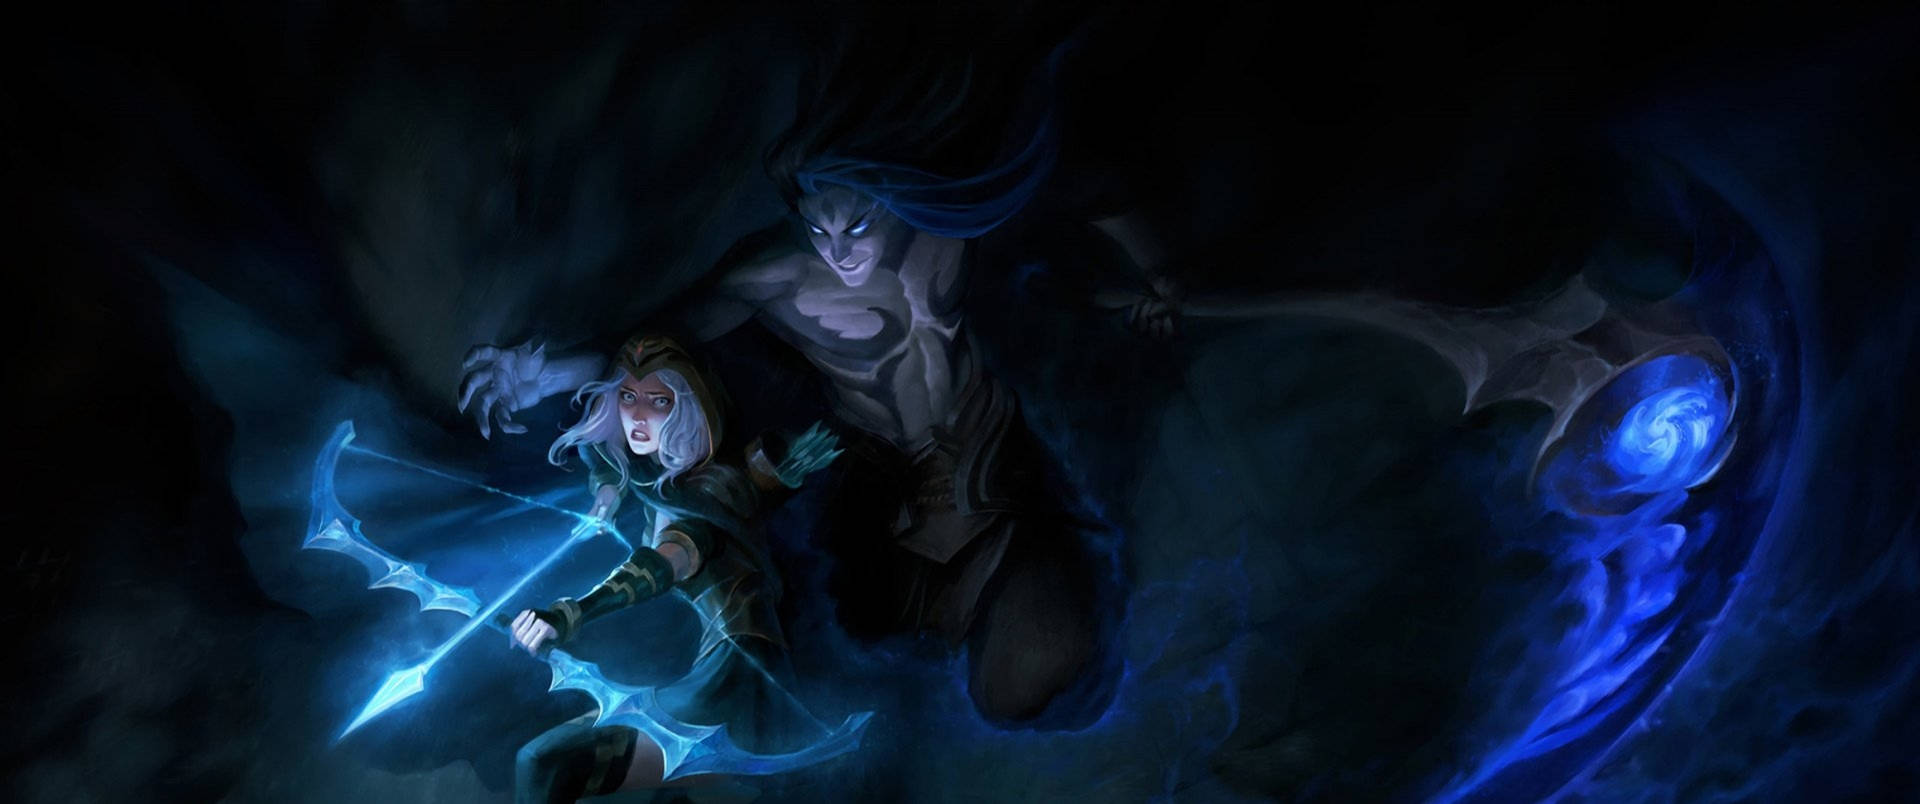 A Dark Image Of Two People Holding A Sword Wallpaper